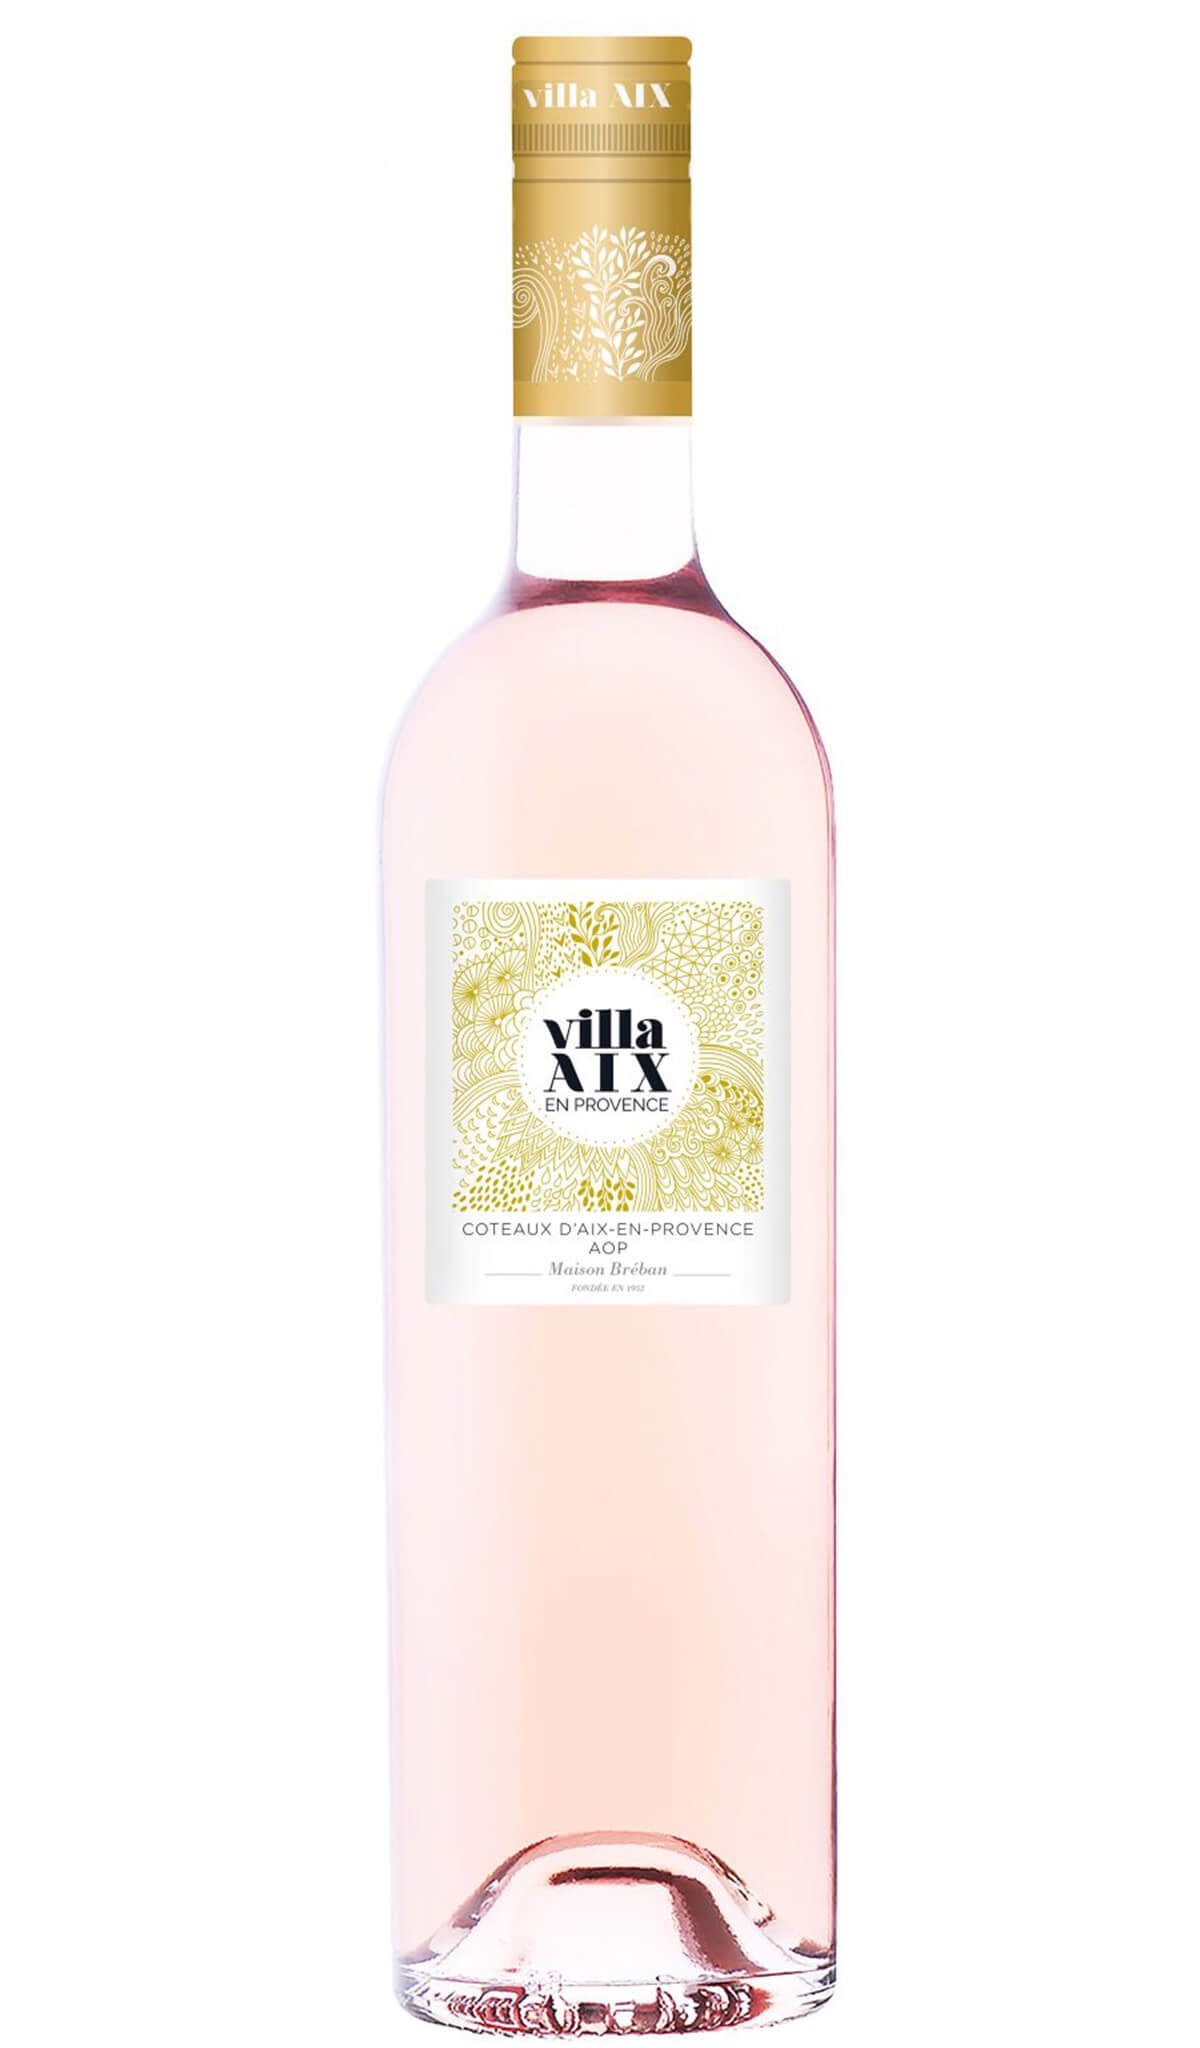 Find out more, explore the range and purchase Maison Breban Villa AIX Rose 2021 (France) available online at Wine Sellers Direct - Australia's independent liquor specialists.